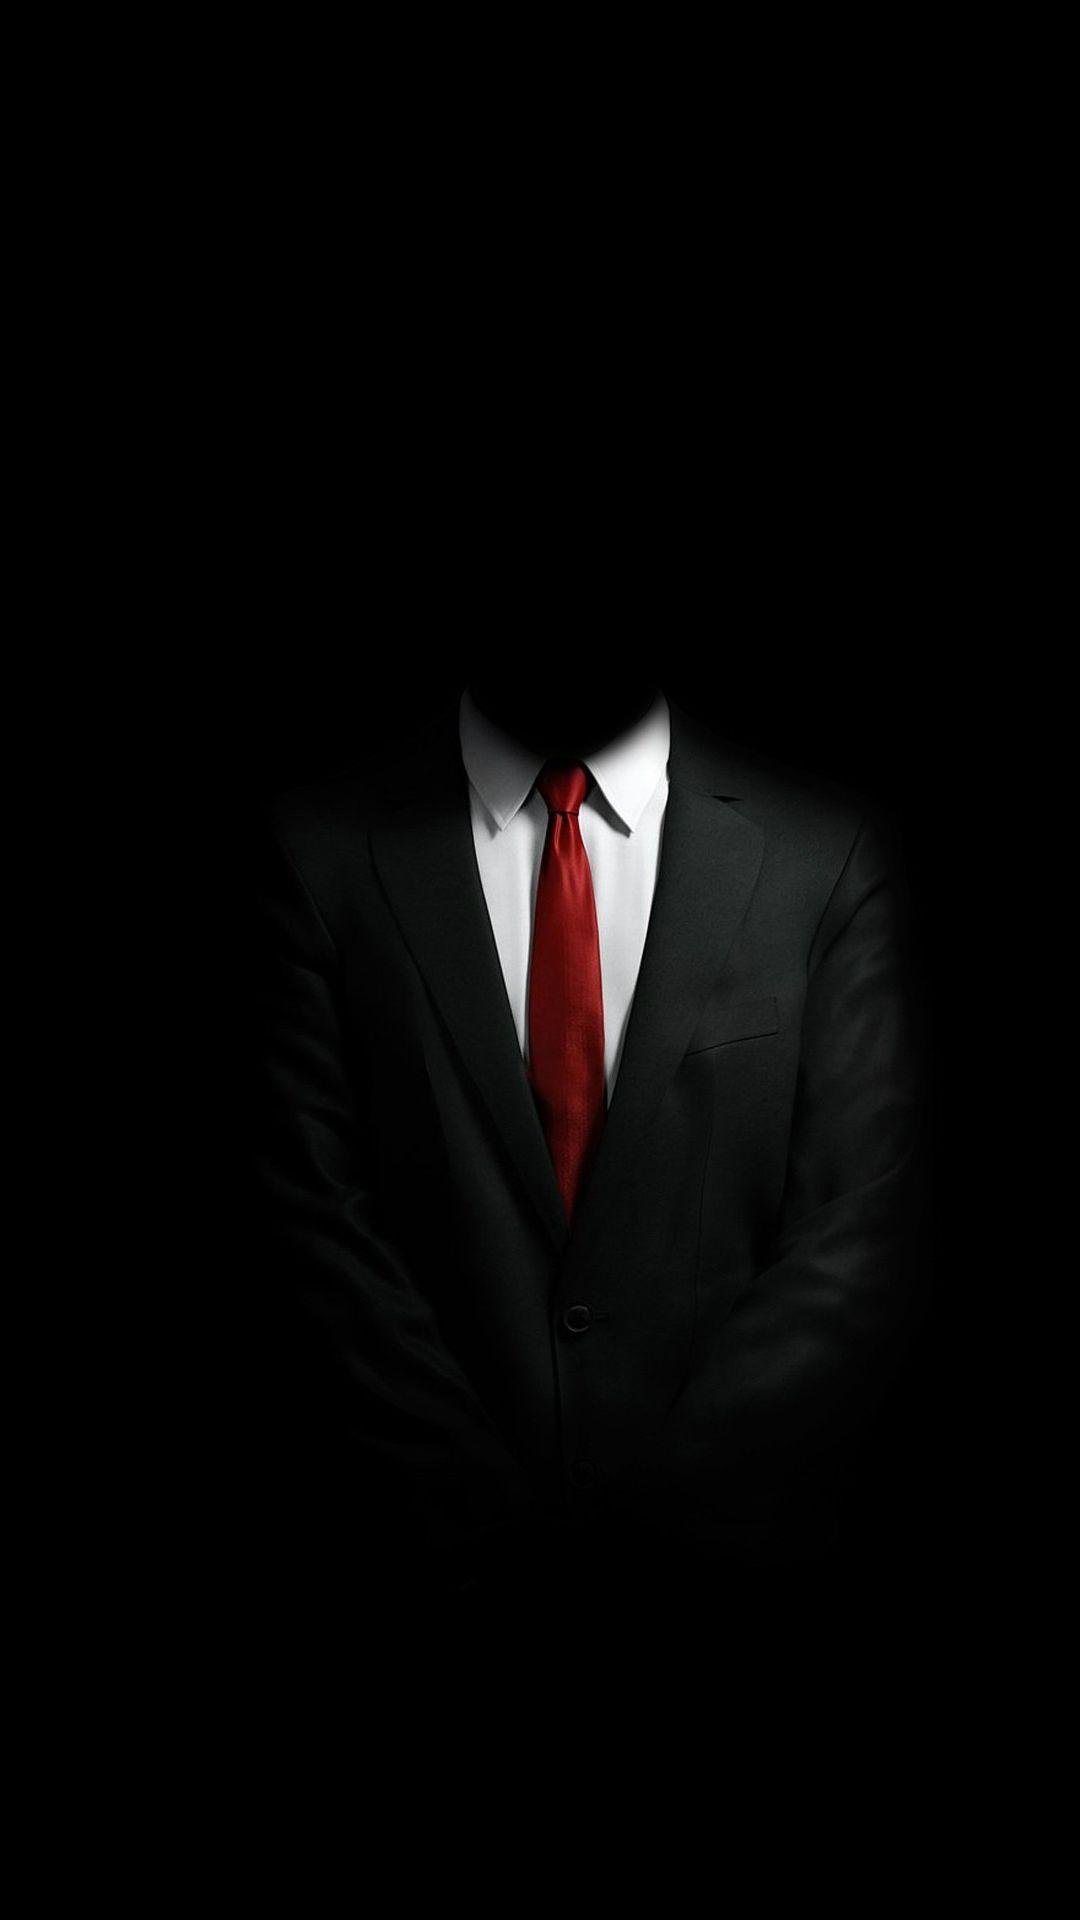 Mystery Man In Suit #iPhone #wallpaper. iPhone 8 wallpaper